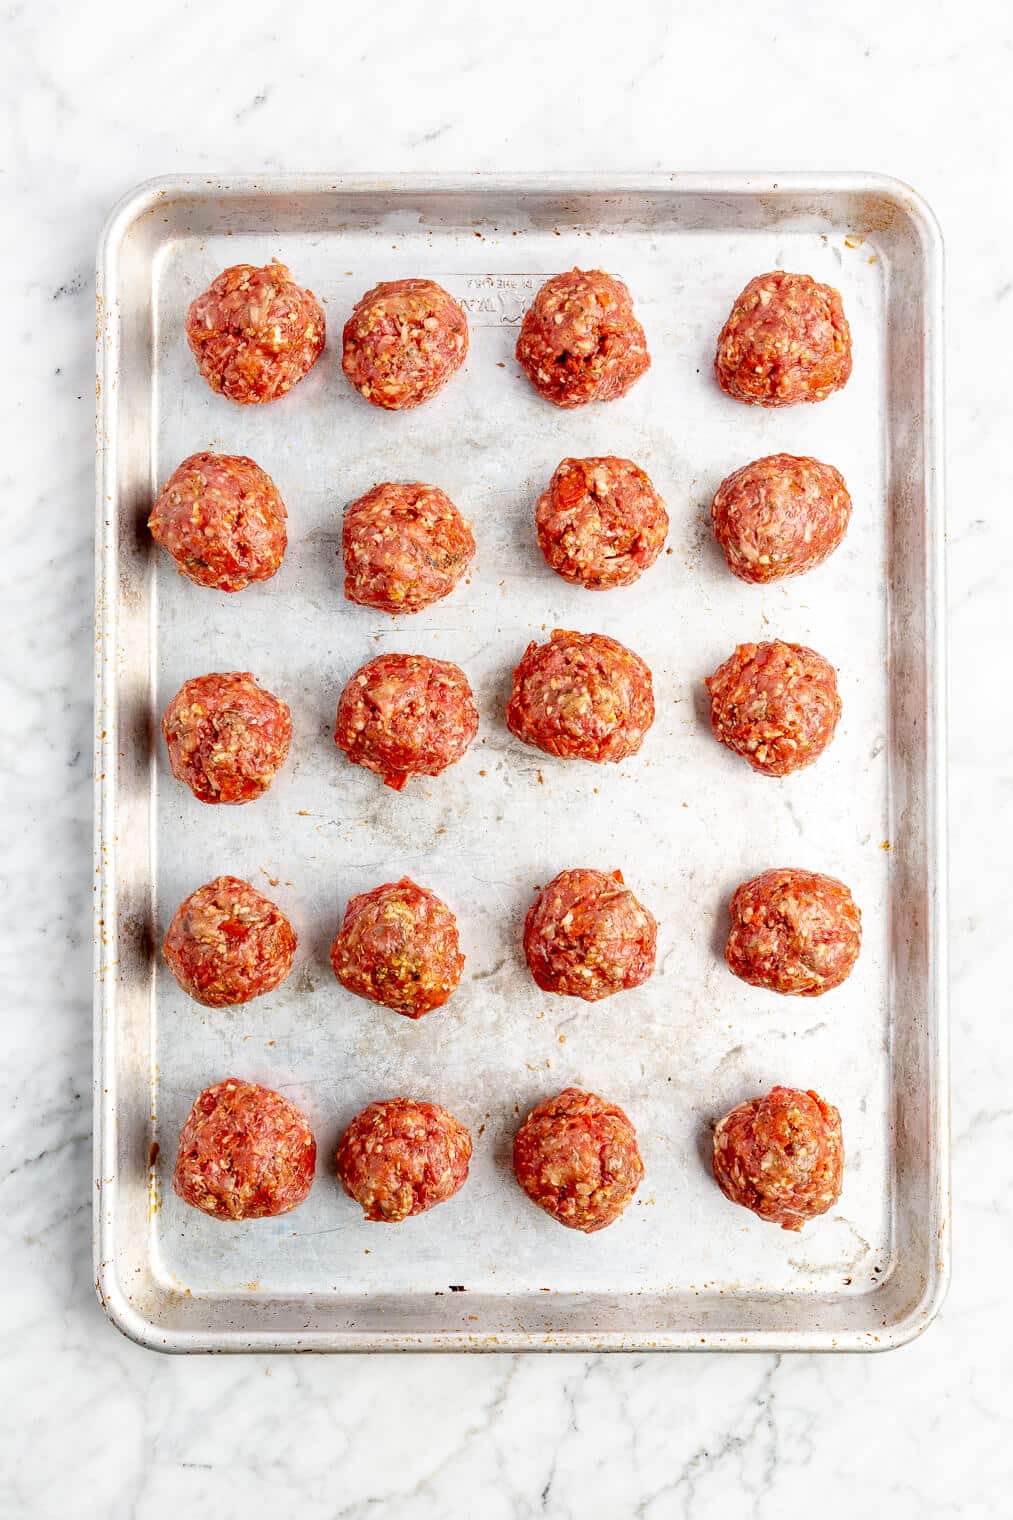 20 raw pizza meatballs in rows on a sheet pan.